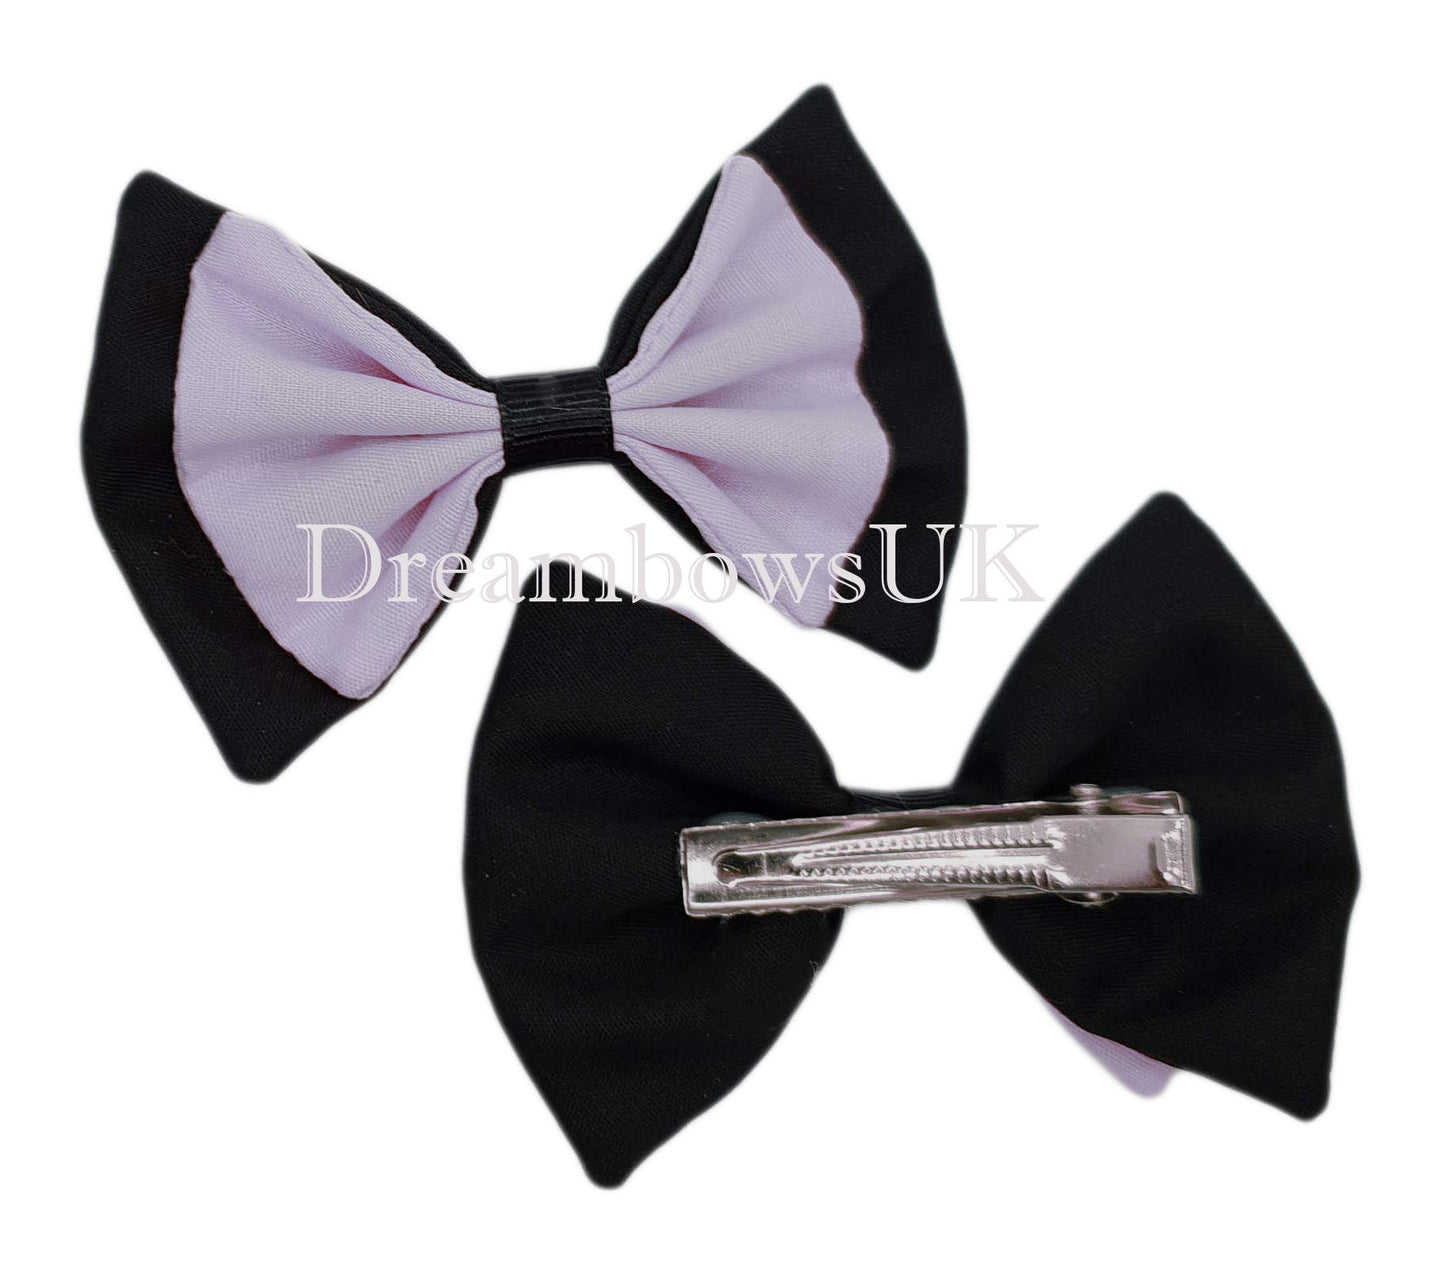 2x Black and lilac fabric hair bows